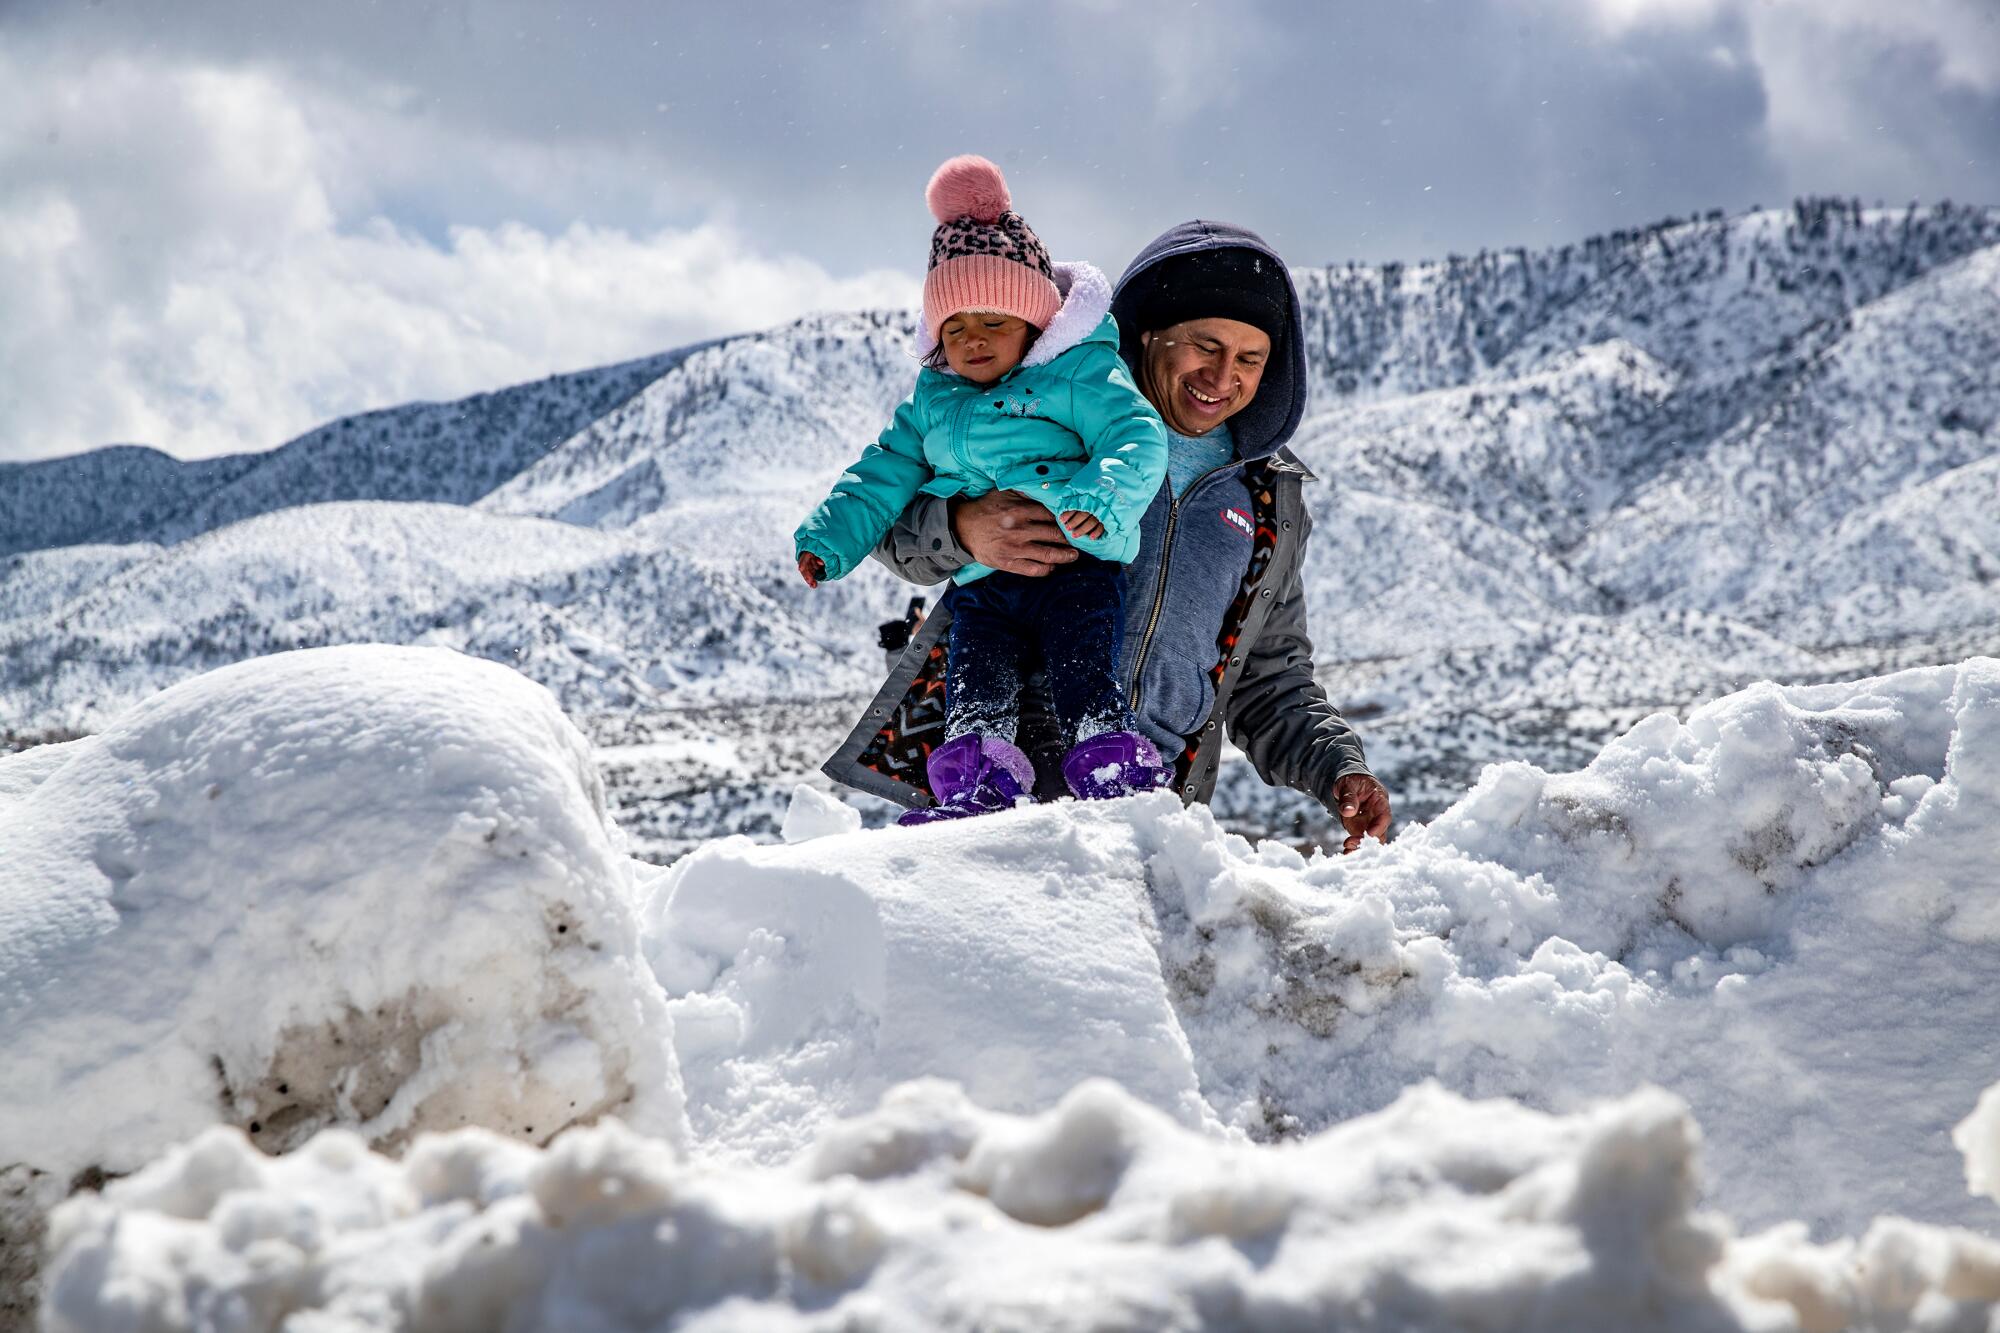 A man carries his toddler through snow in the mountains